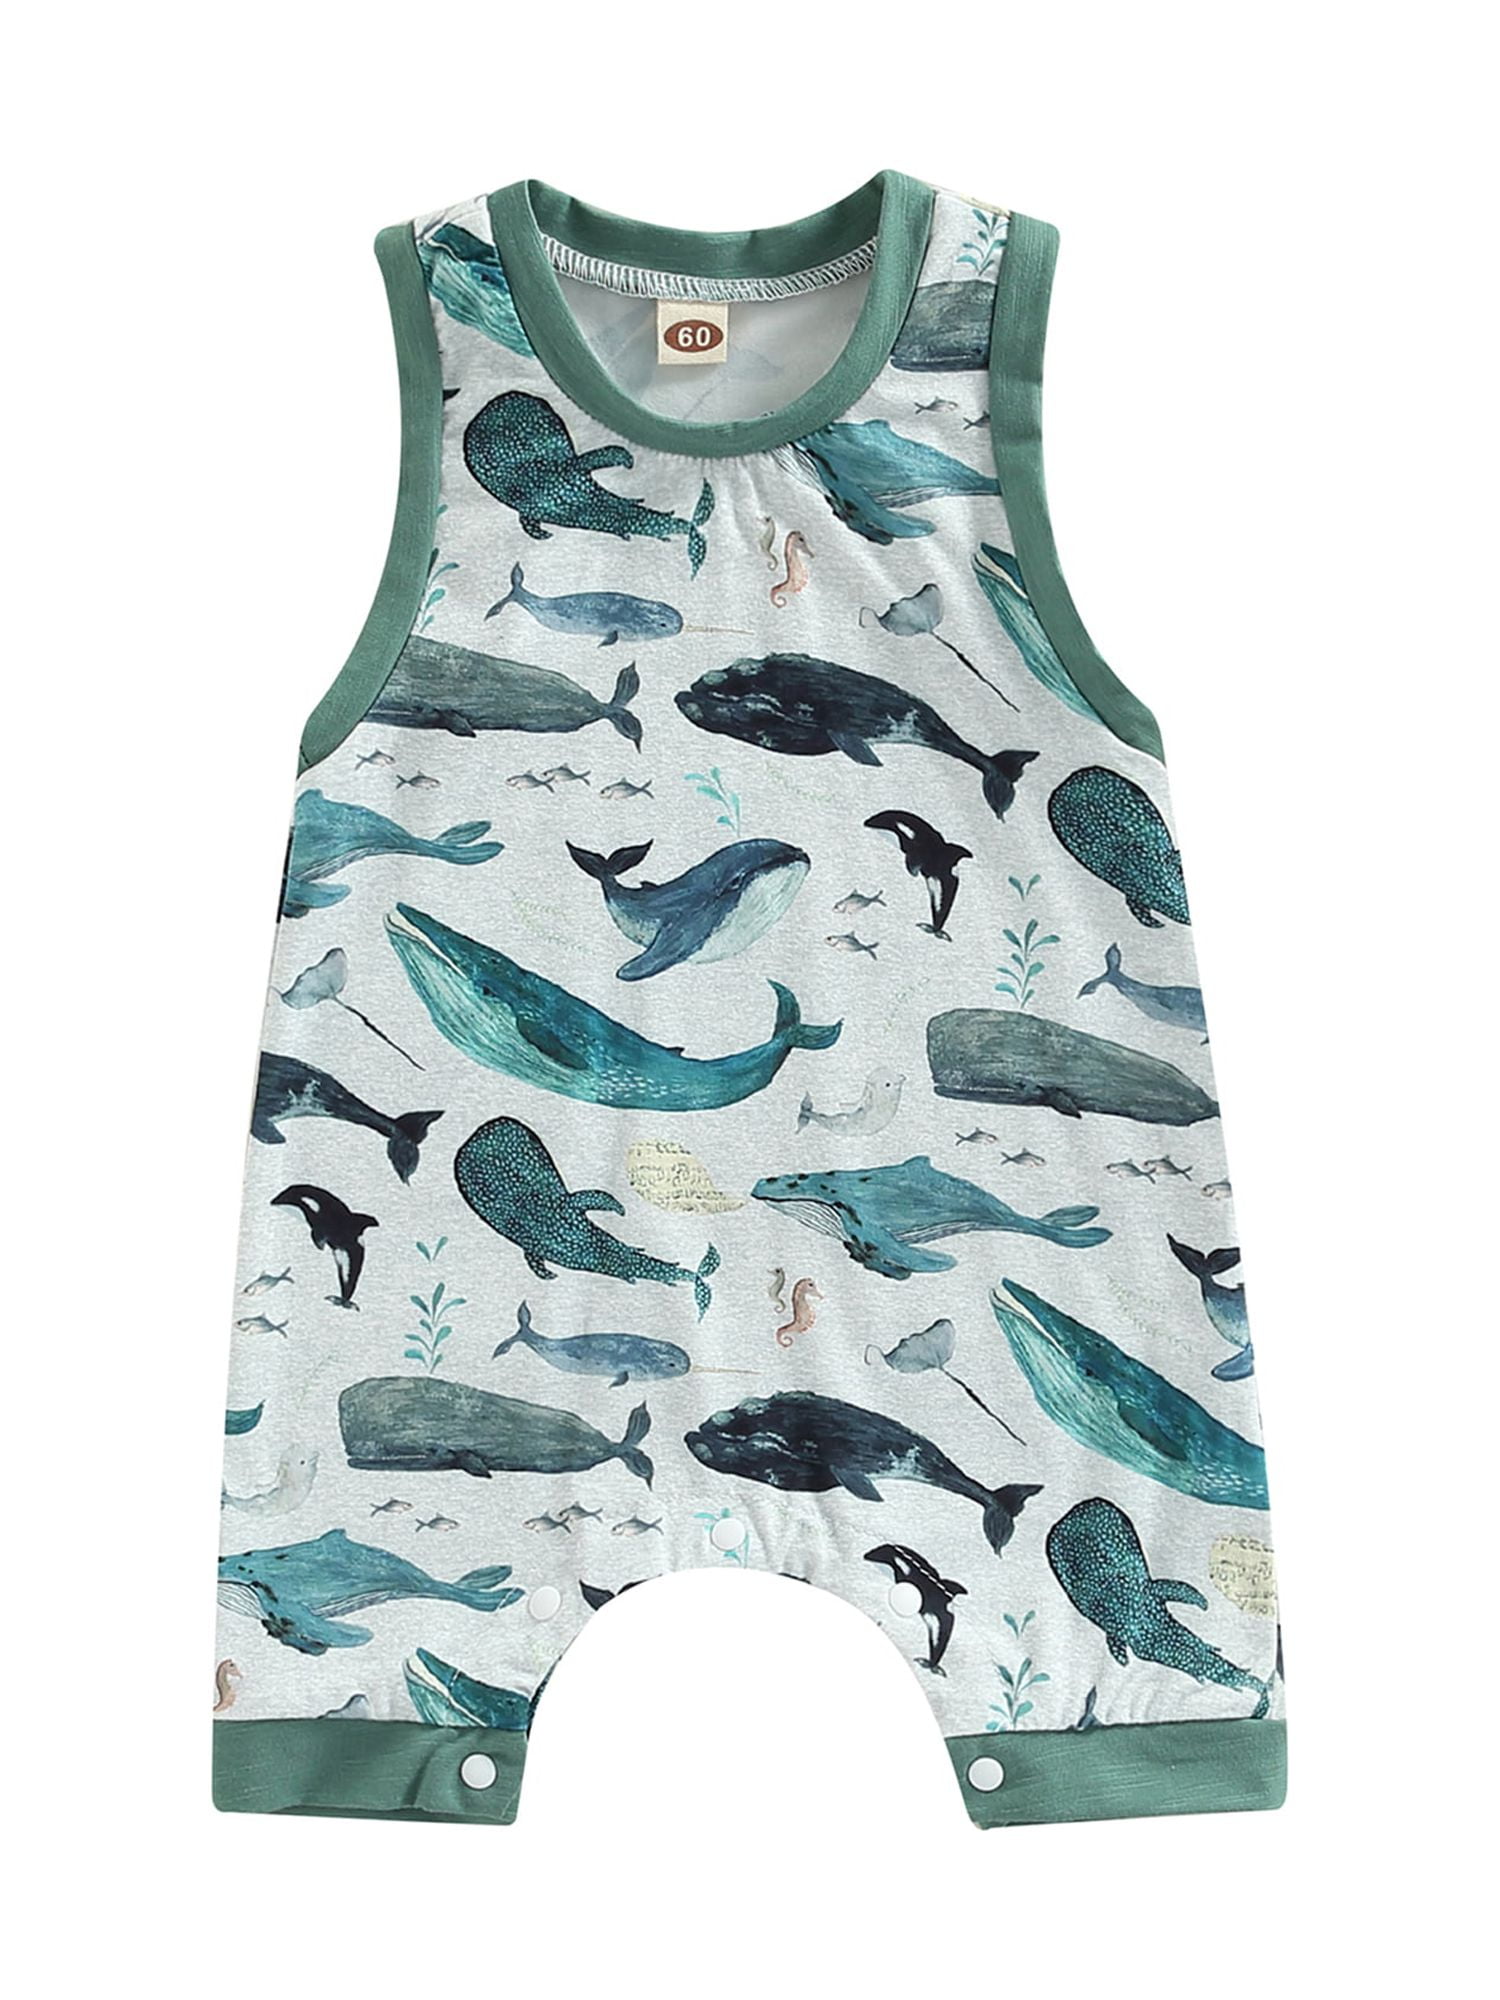 Newborn Baby Boy Romper Clothes Sleeveless Fish Print Tank Top Bodysuit One  Piece Jumpsuit Shorts Summer Outfit 